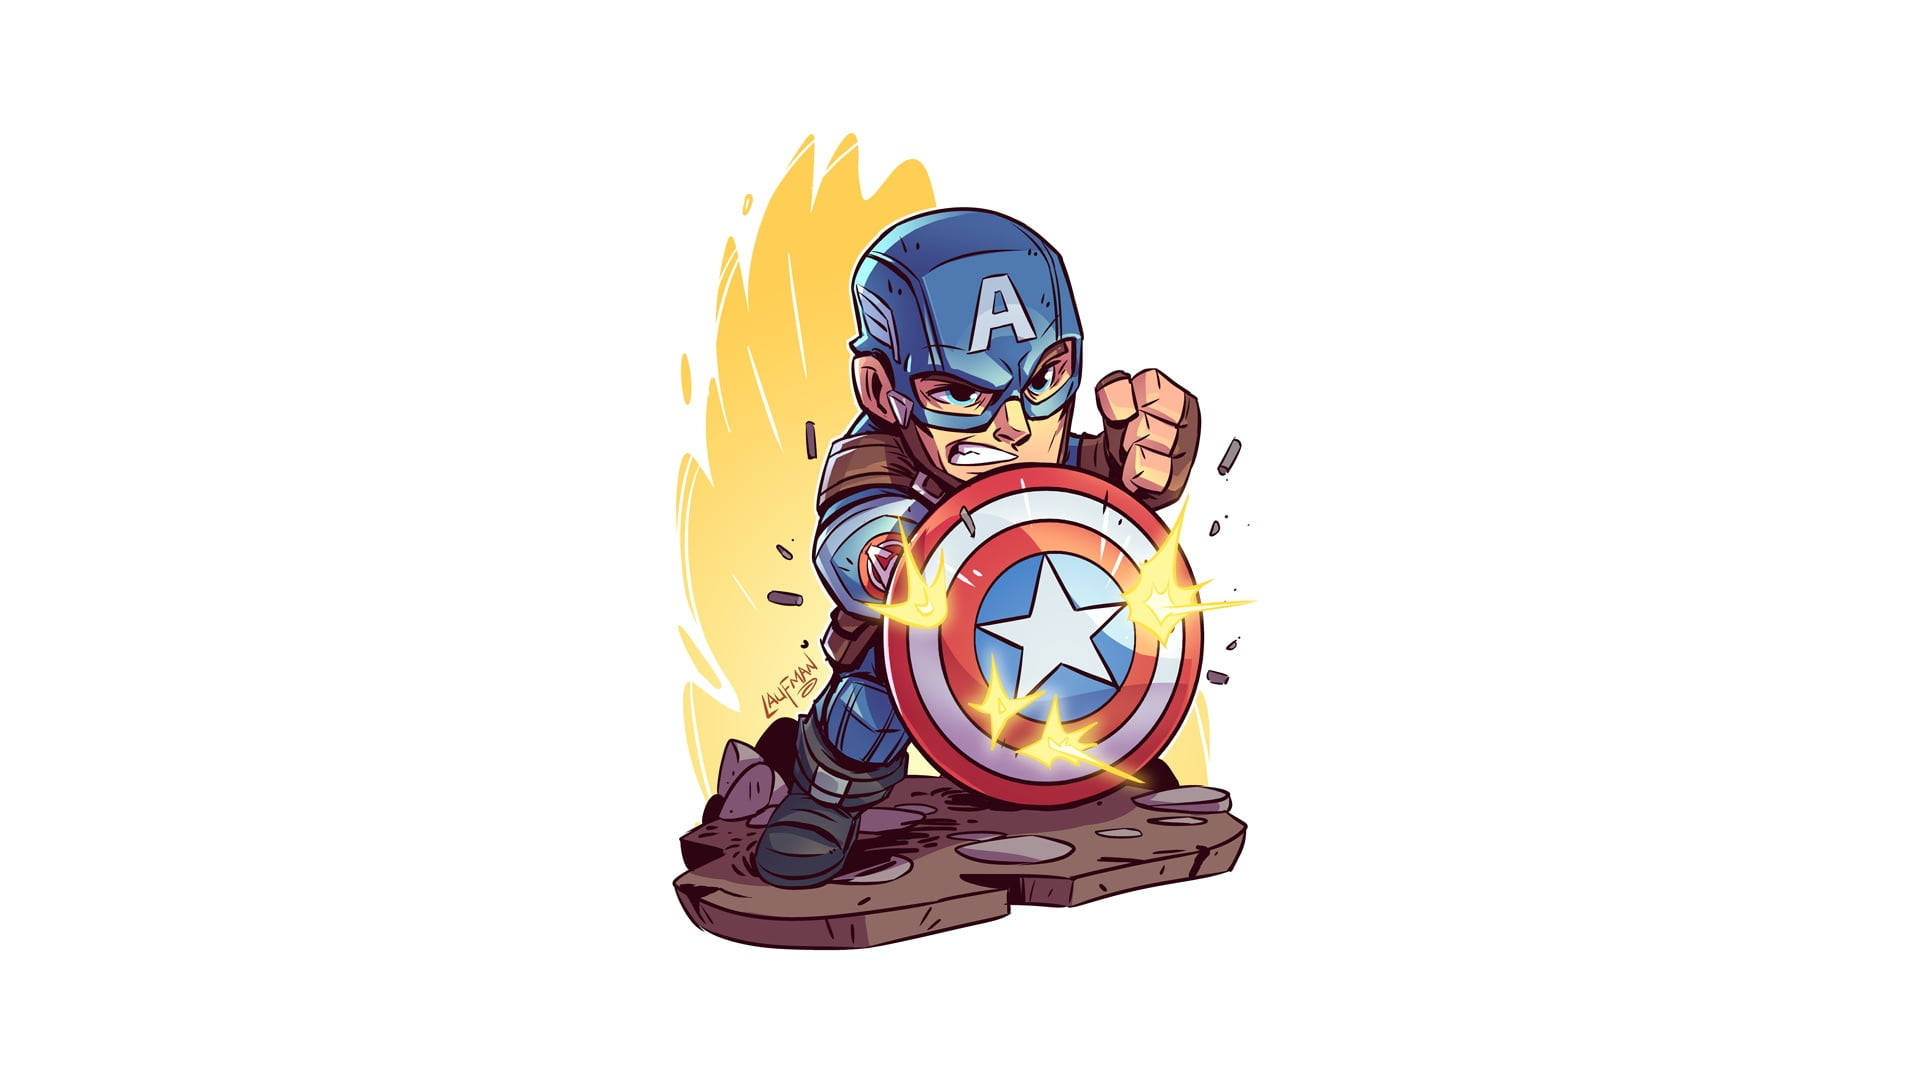 "The heroic Captain America, standing strong." Wallpaper